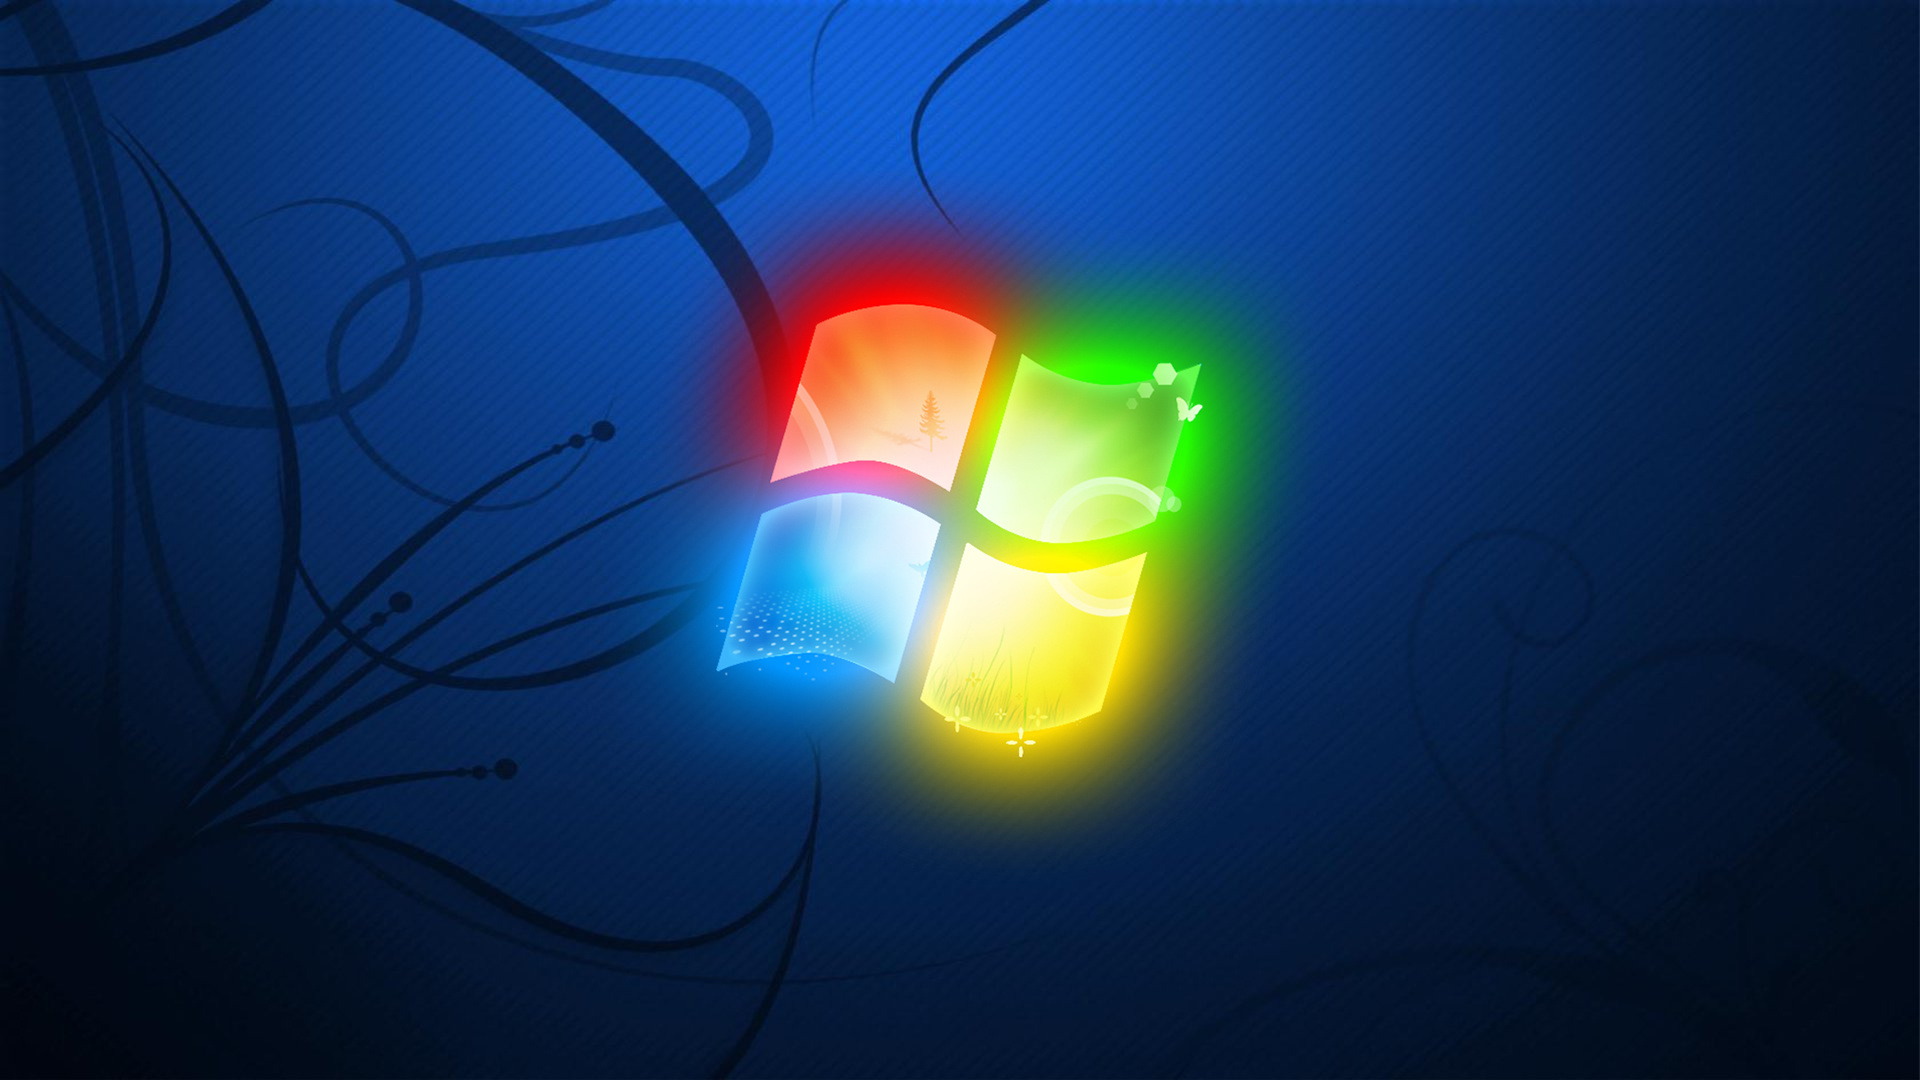 Windows 7 backgrounds wallpapers downl…